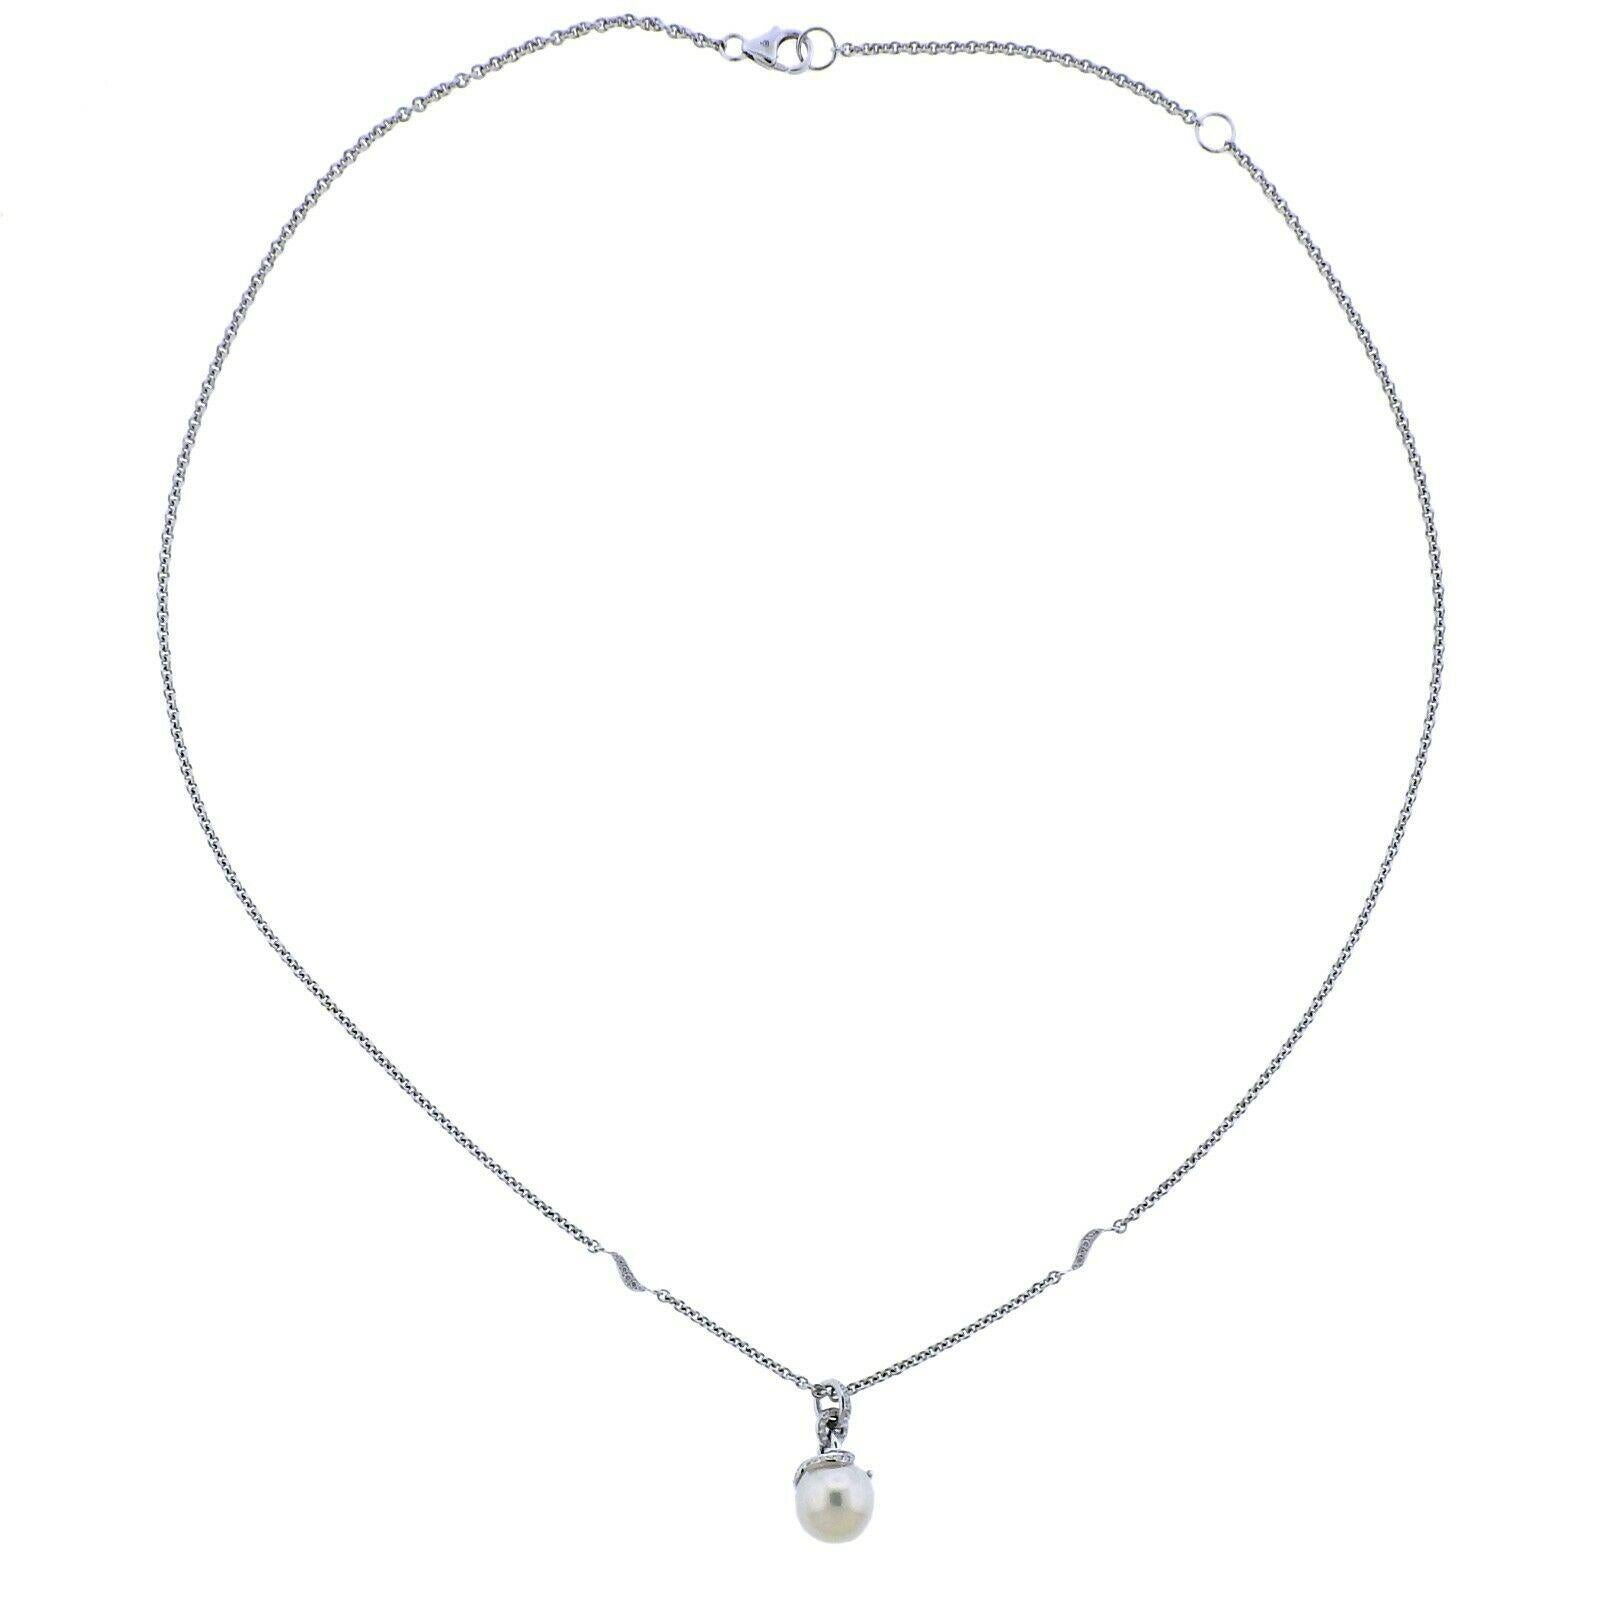 New Mikimoto 18k white gold pendant necklace, with 8.9mm A+ pearl and approx. 0.15ctw in G/VS diamonds. Retail $3200. Comes with box.  Necklace is 18